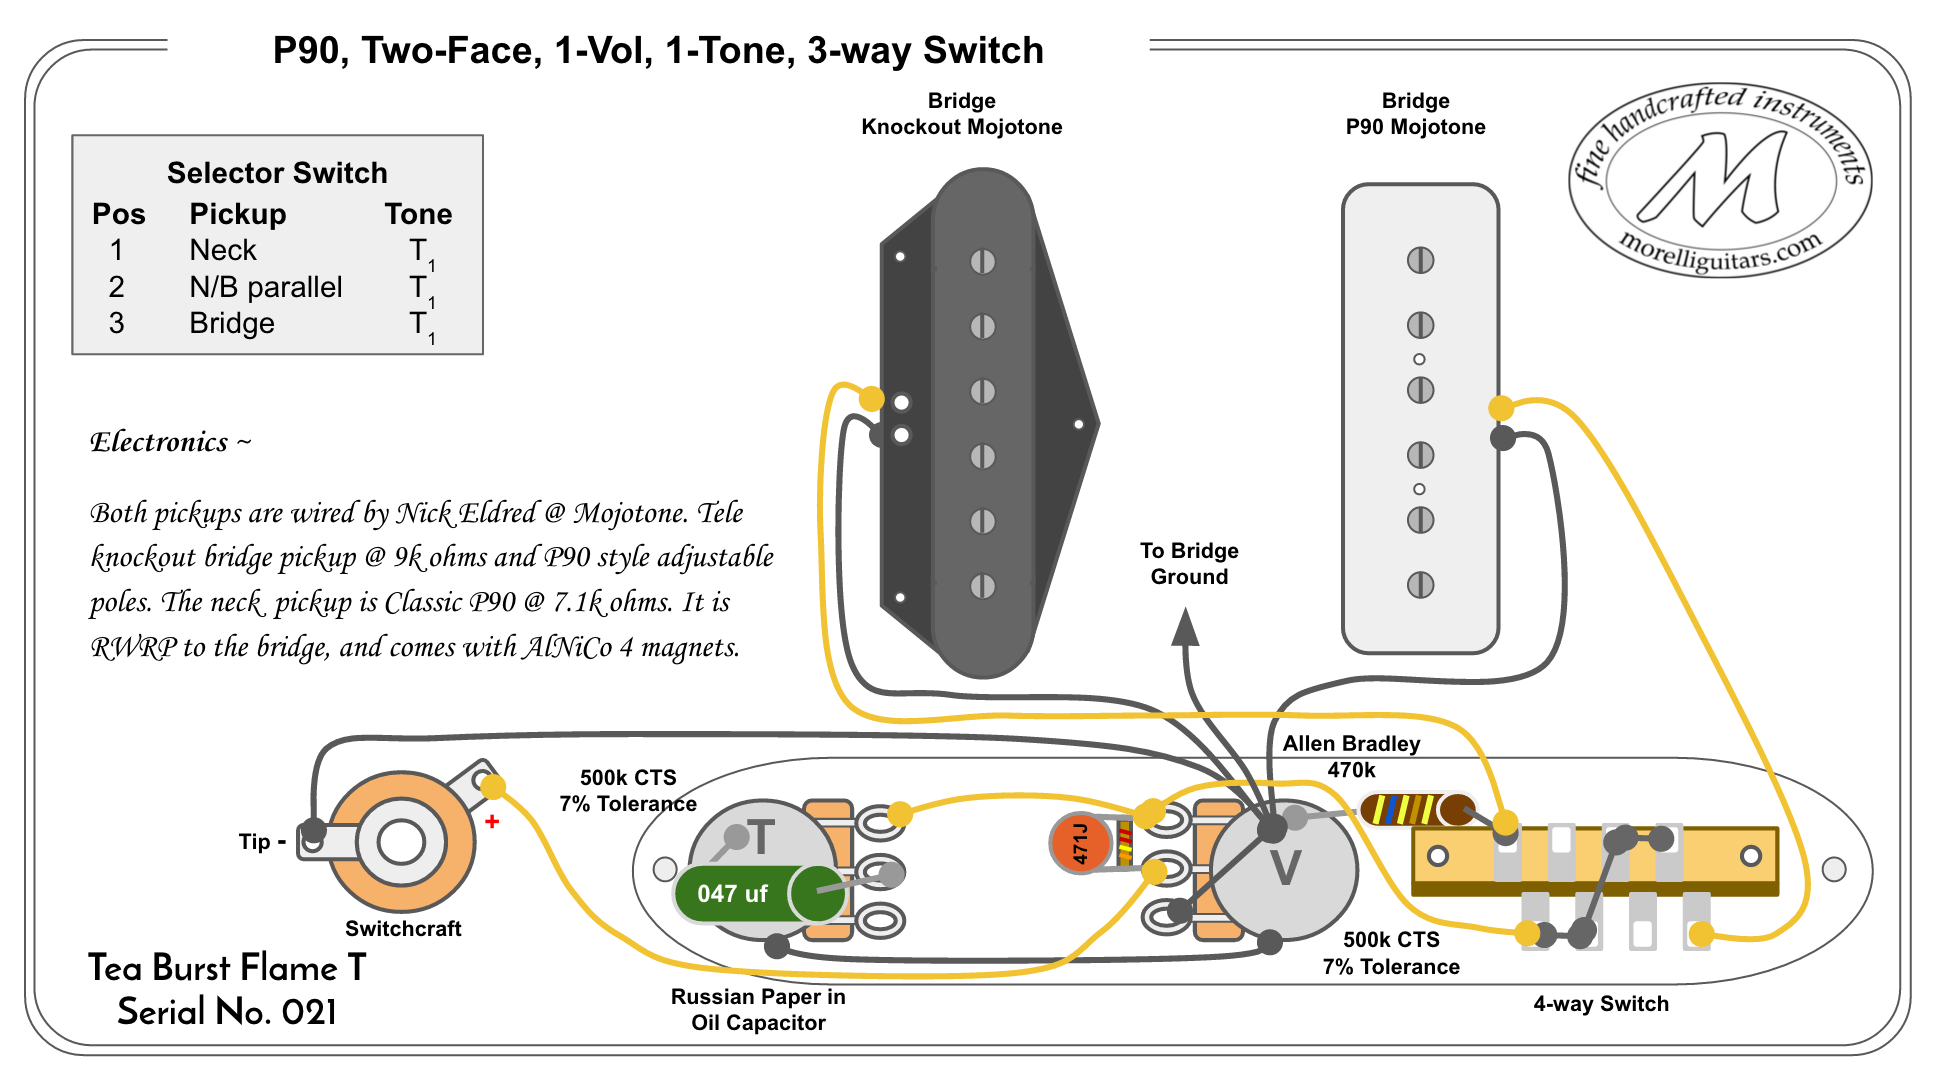 P90, Two-Face, 1-Vol, 1-Tone, 3-way Switch - FMM 021 ... 3 p90 wiring diagram 